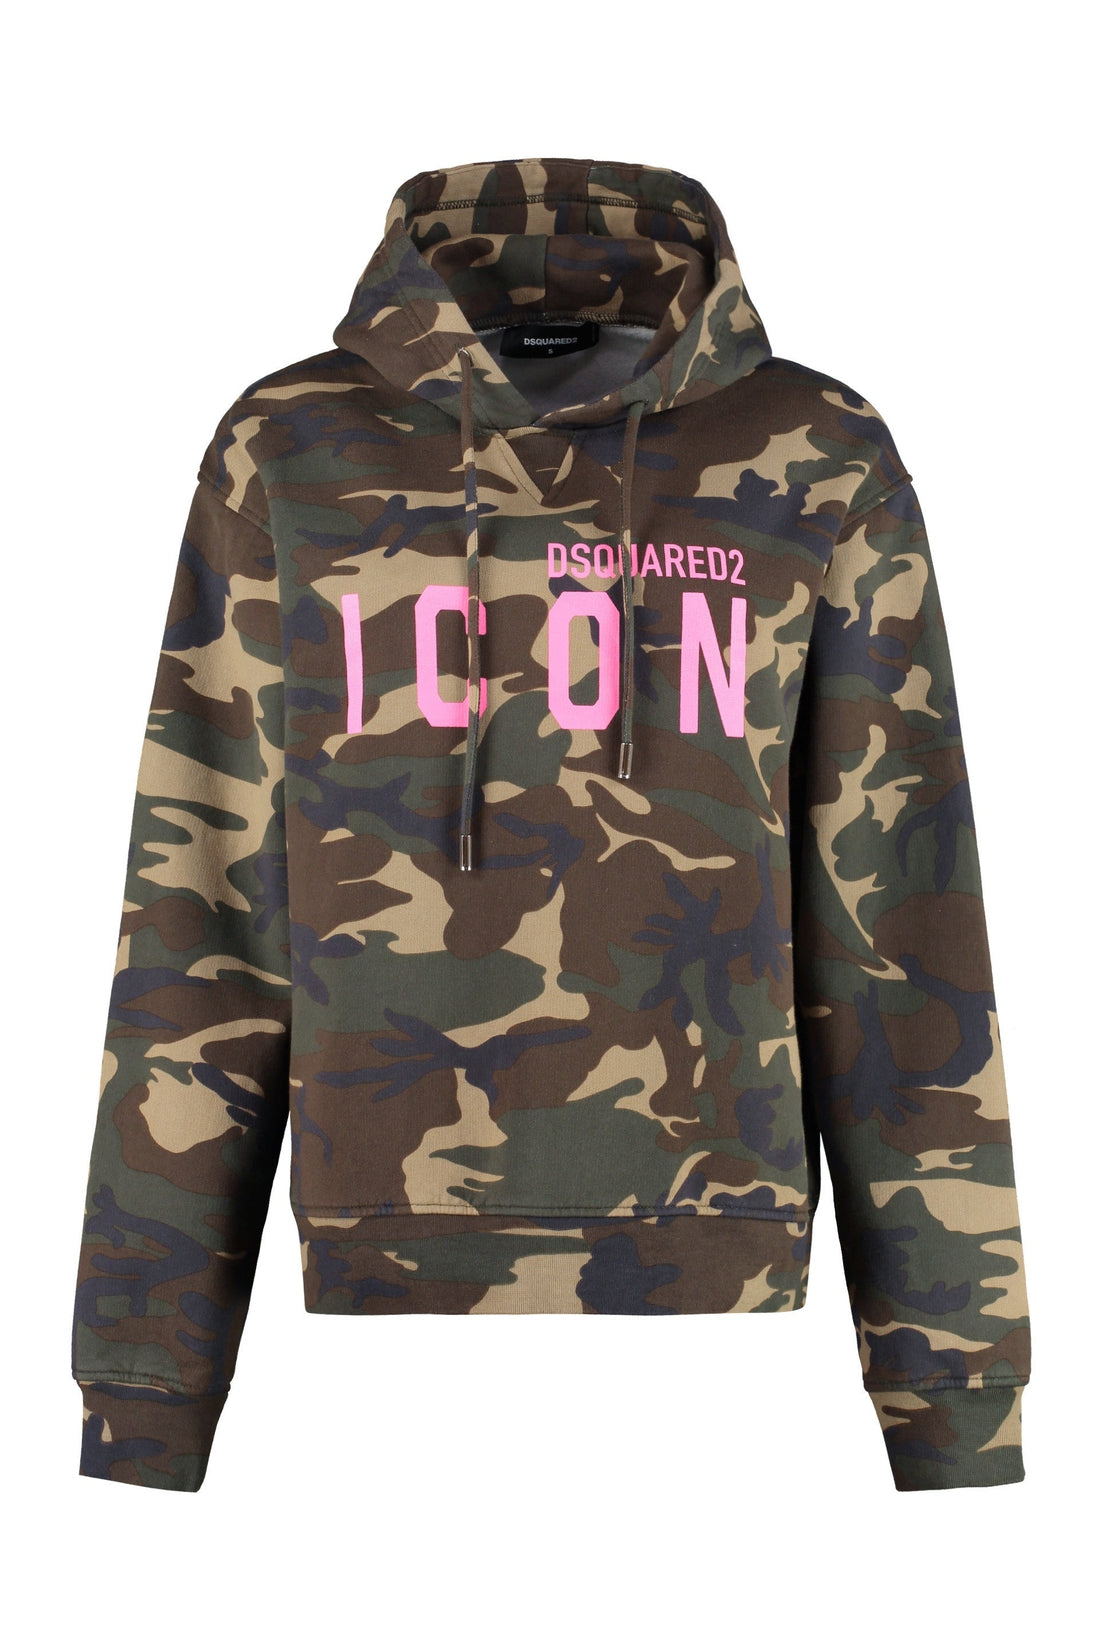 Dsquared2-OUTLET-SALE-Printed cotton hoodie-ARCHIVIST